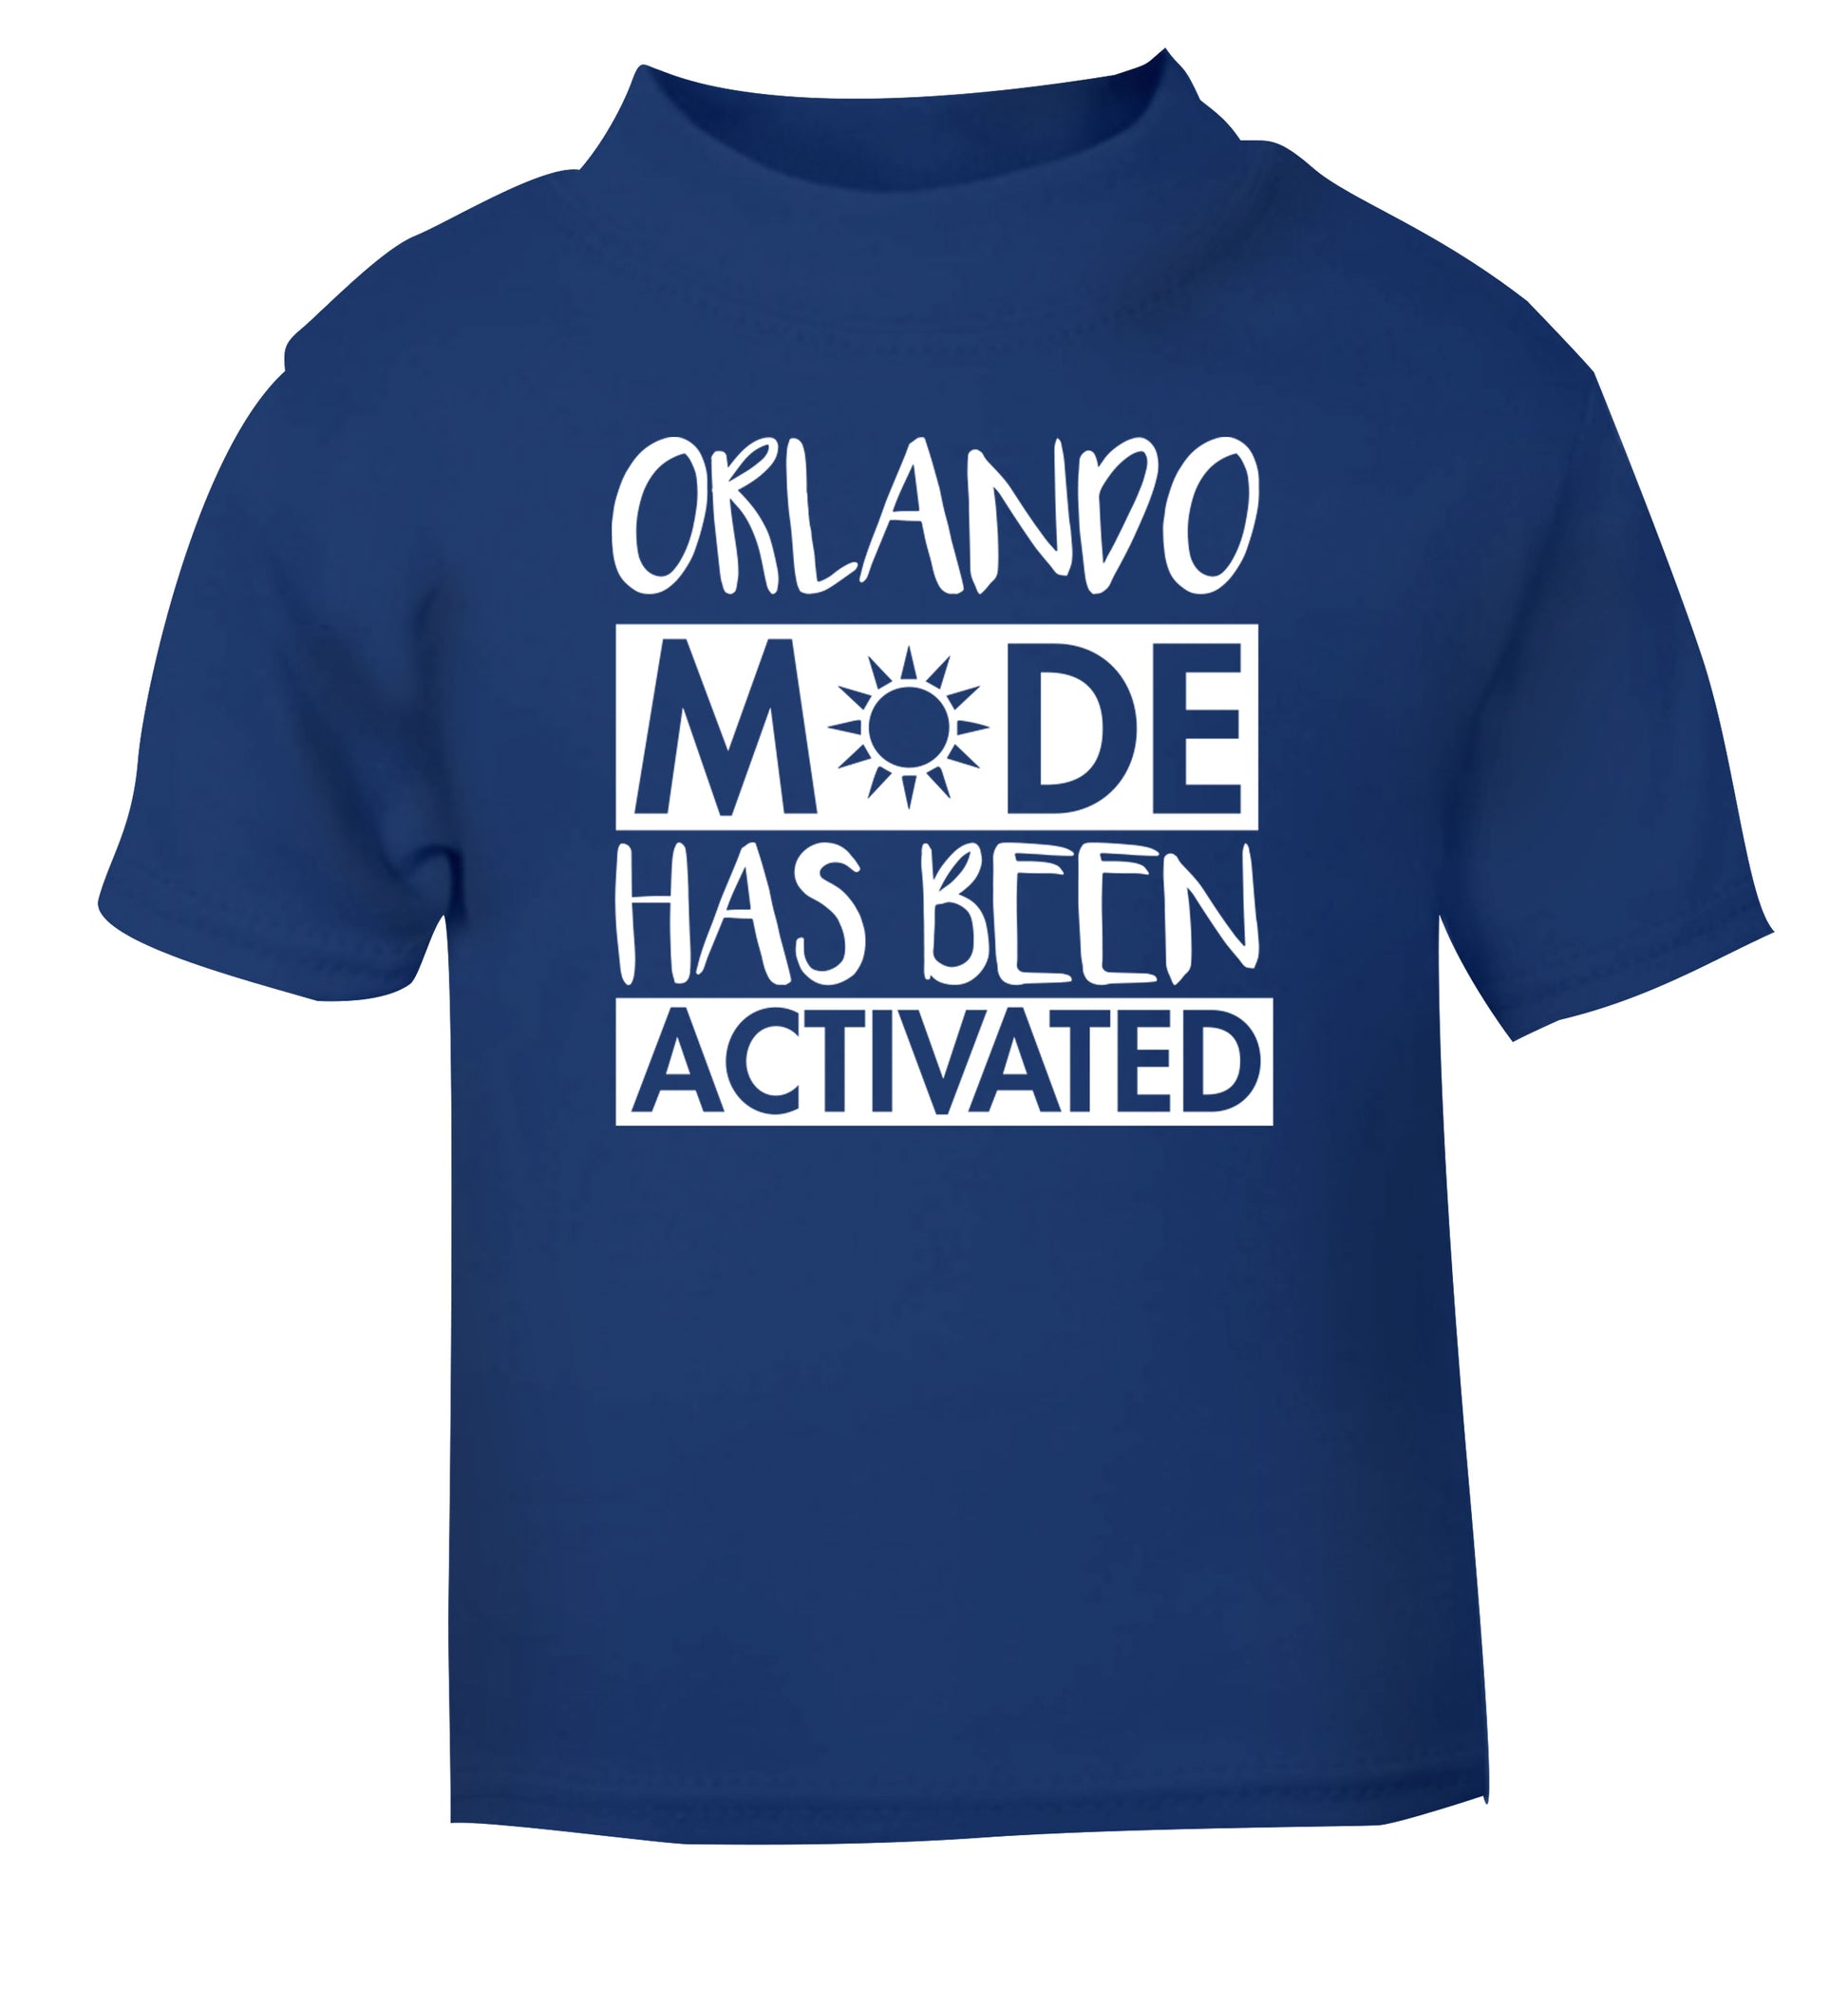 Orlando mode has been activated blue Baby Toddler Tshirt 2 Years